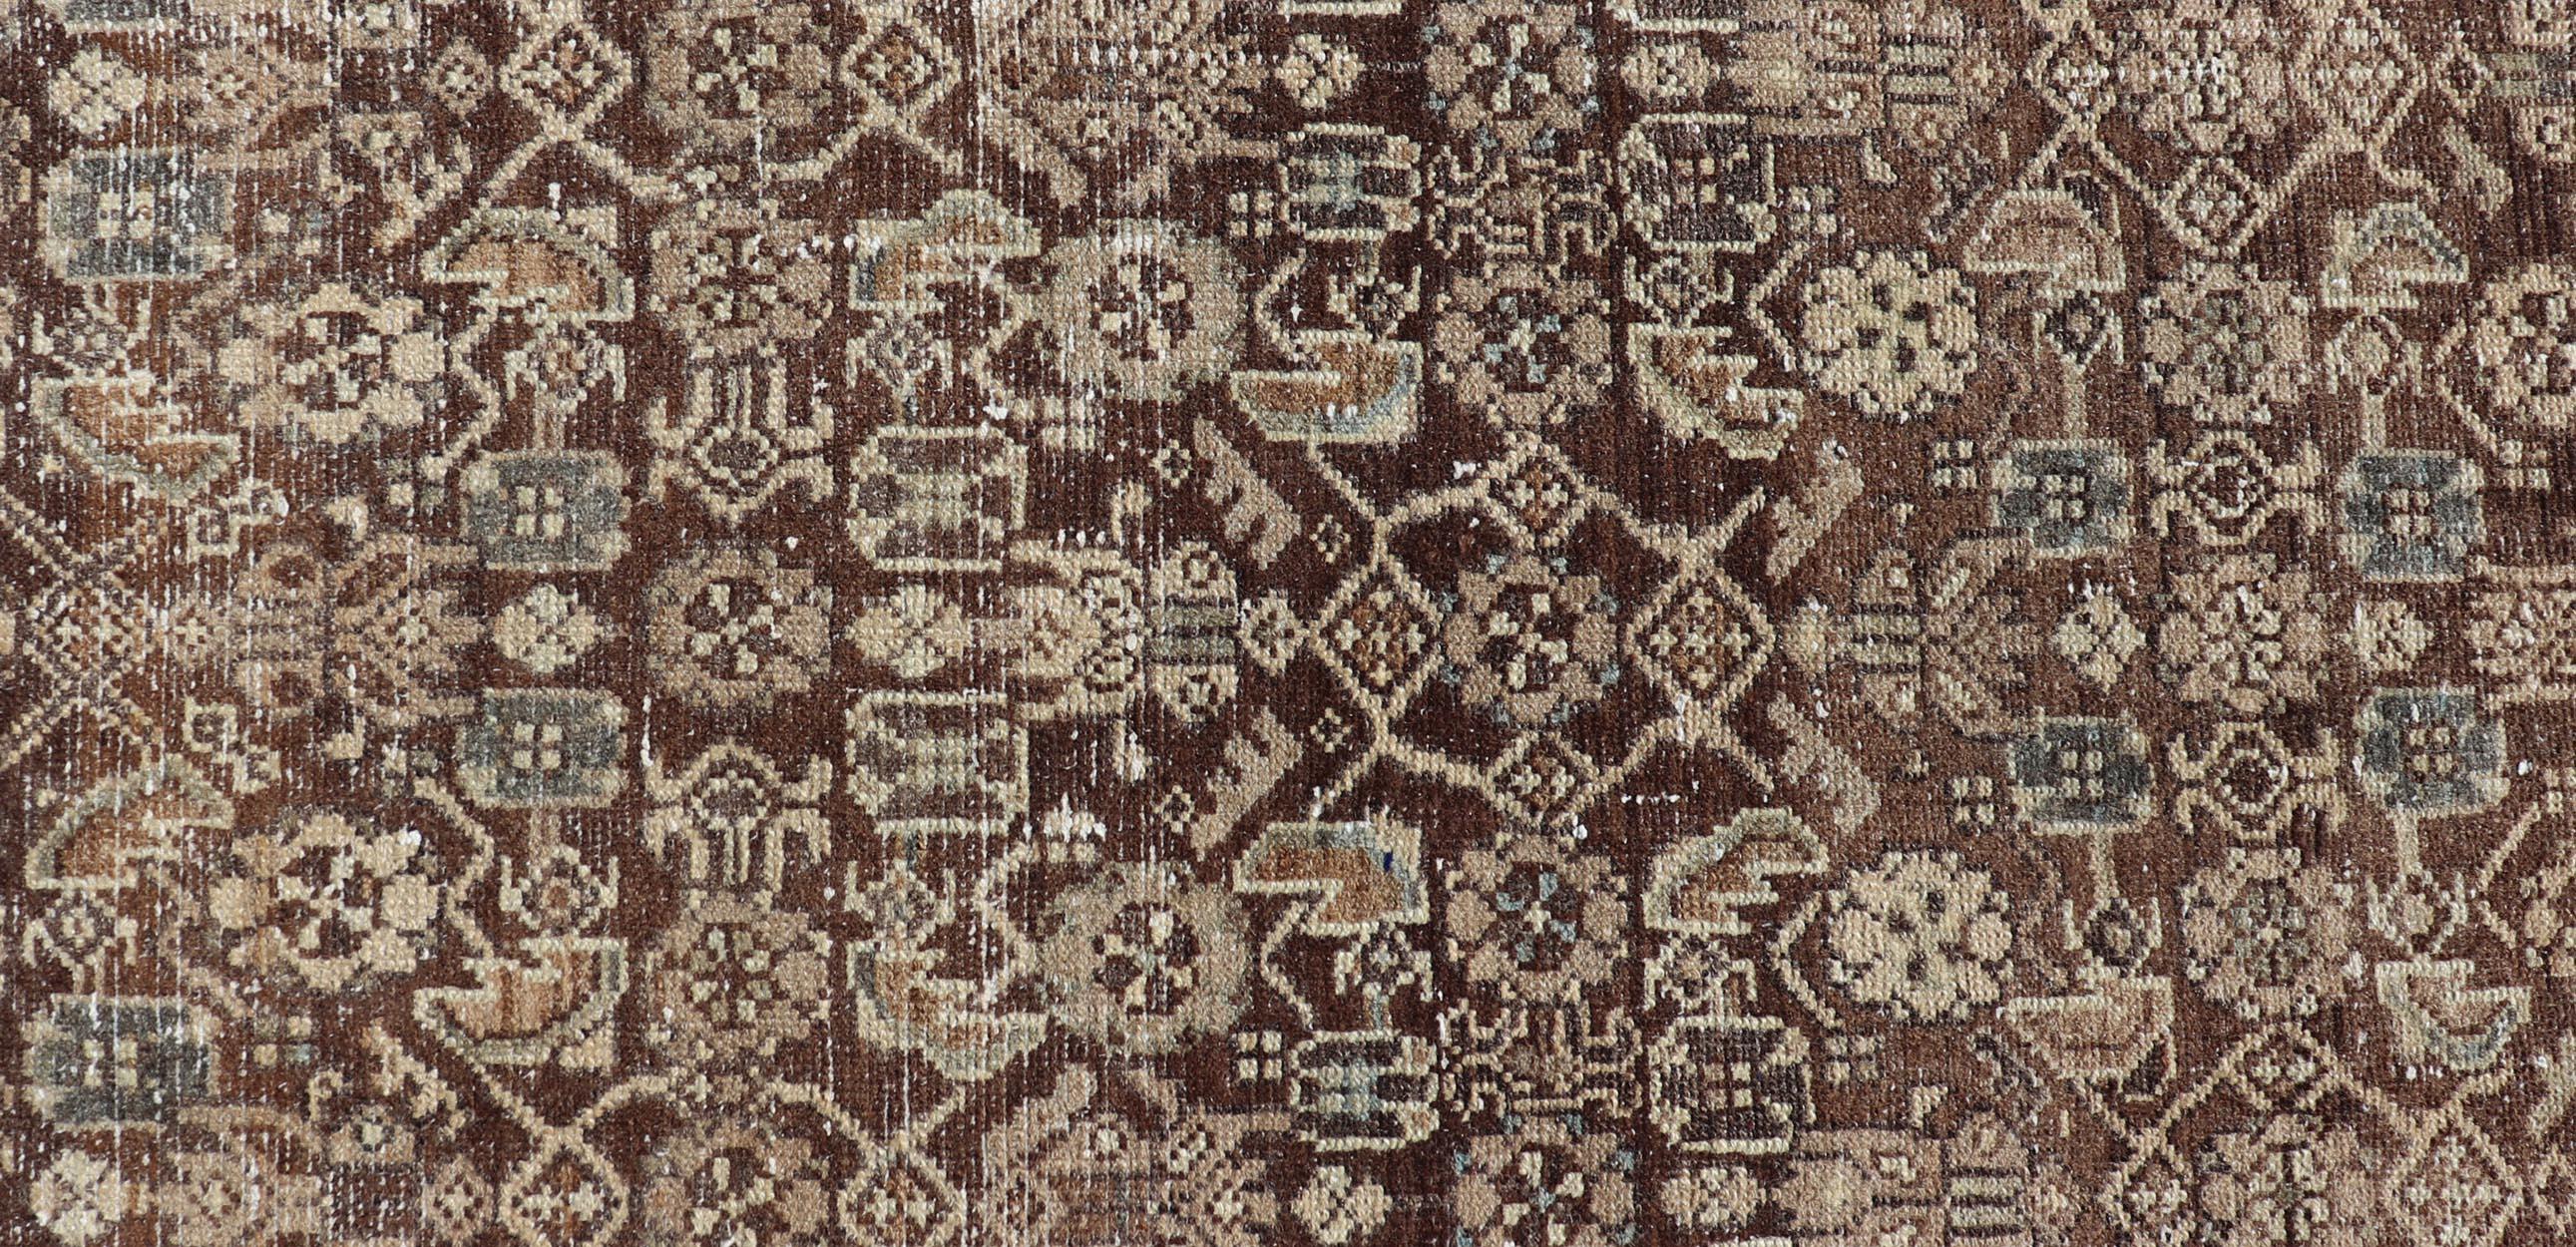 Measures: 2'8 x 13'2 

This antique Persian runner features a palette of brown, cream, camel, and accents light blue. The all-over, sub-geometric floral covers the entire cocoa background. The cream border has a stylized floral patter and a